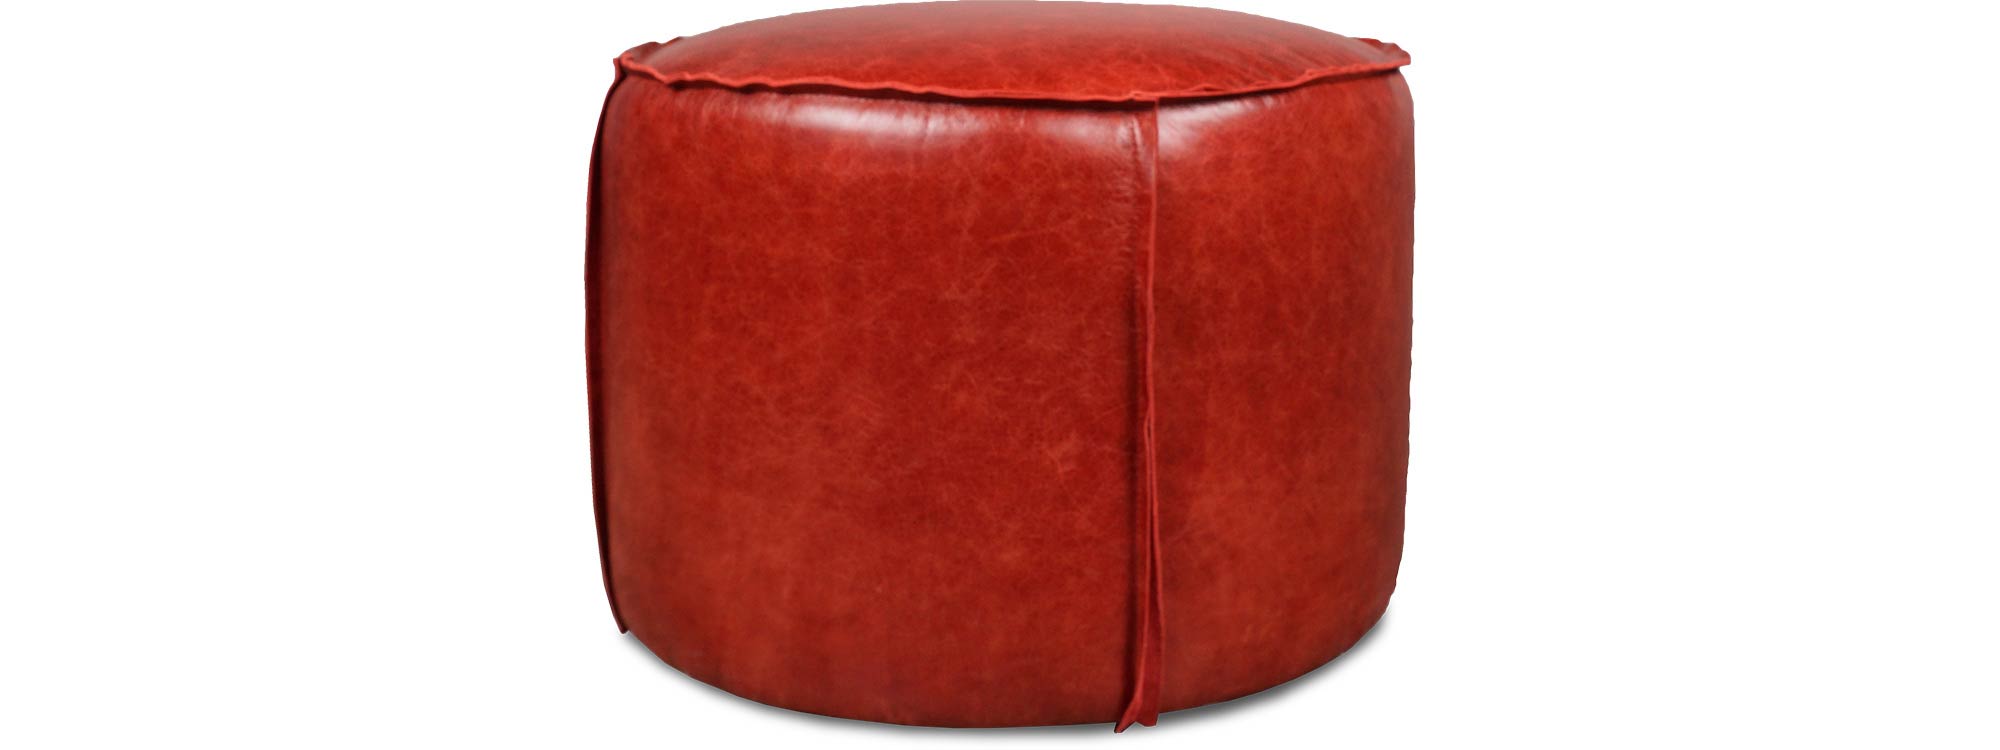 25 Rooster ottoman in Caprieze Salute Red leather